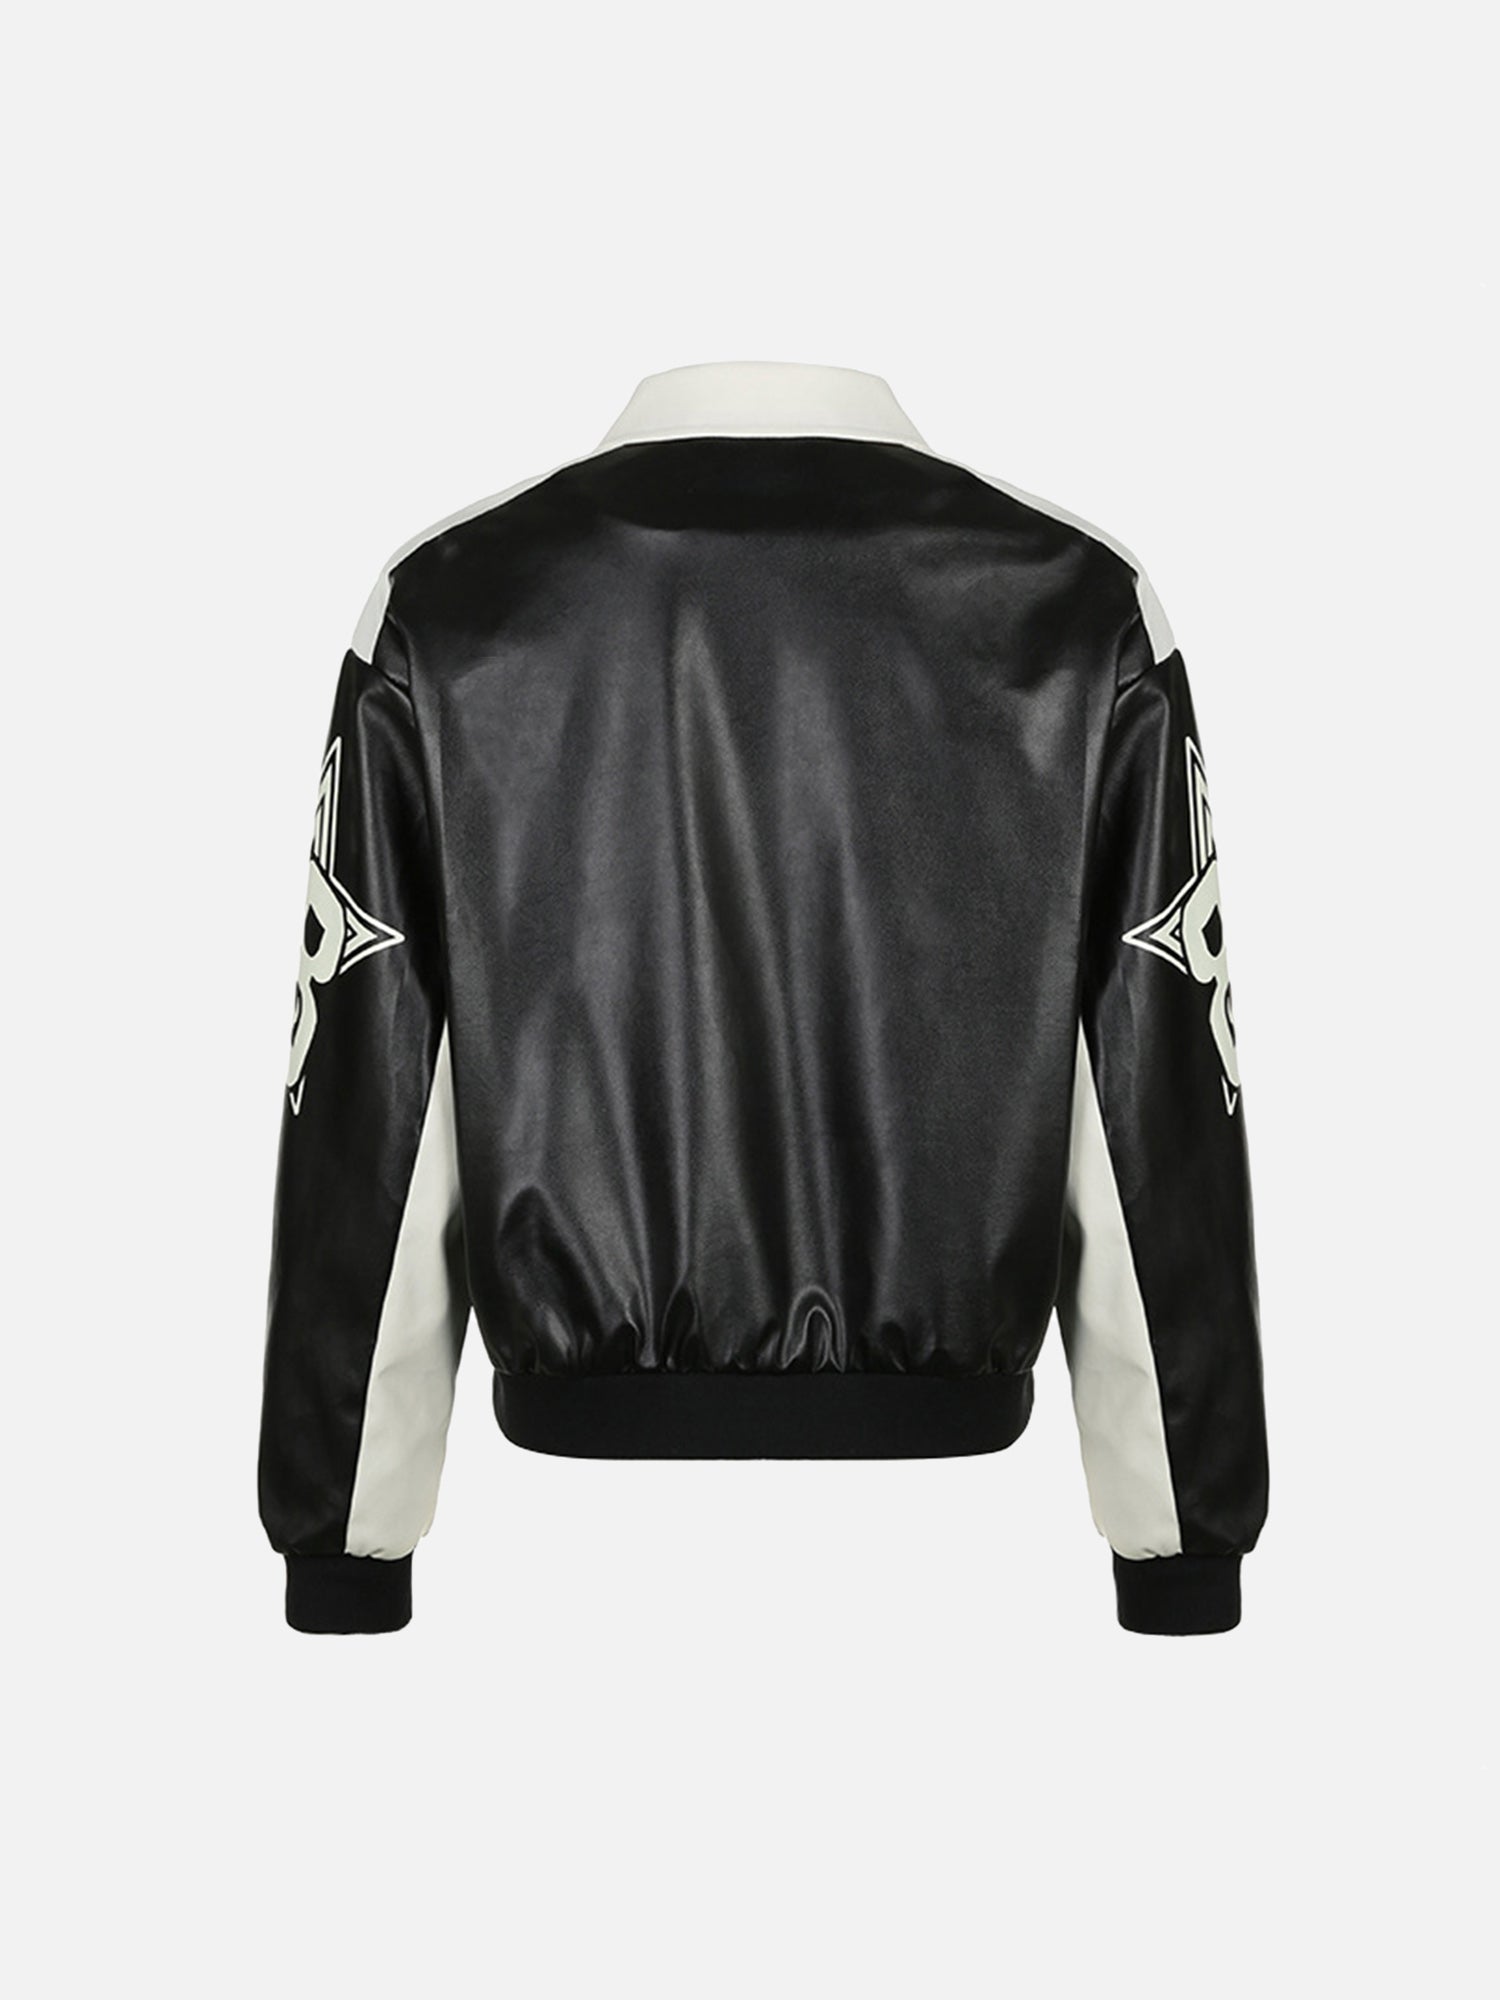 American Street Motorcycle Style Letter Five-pointed Star Jacket